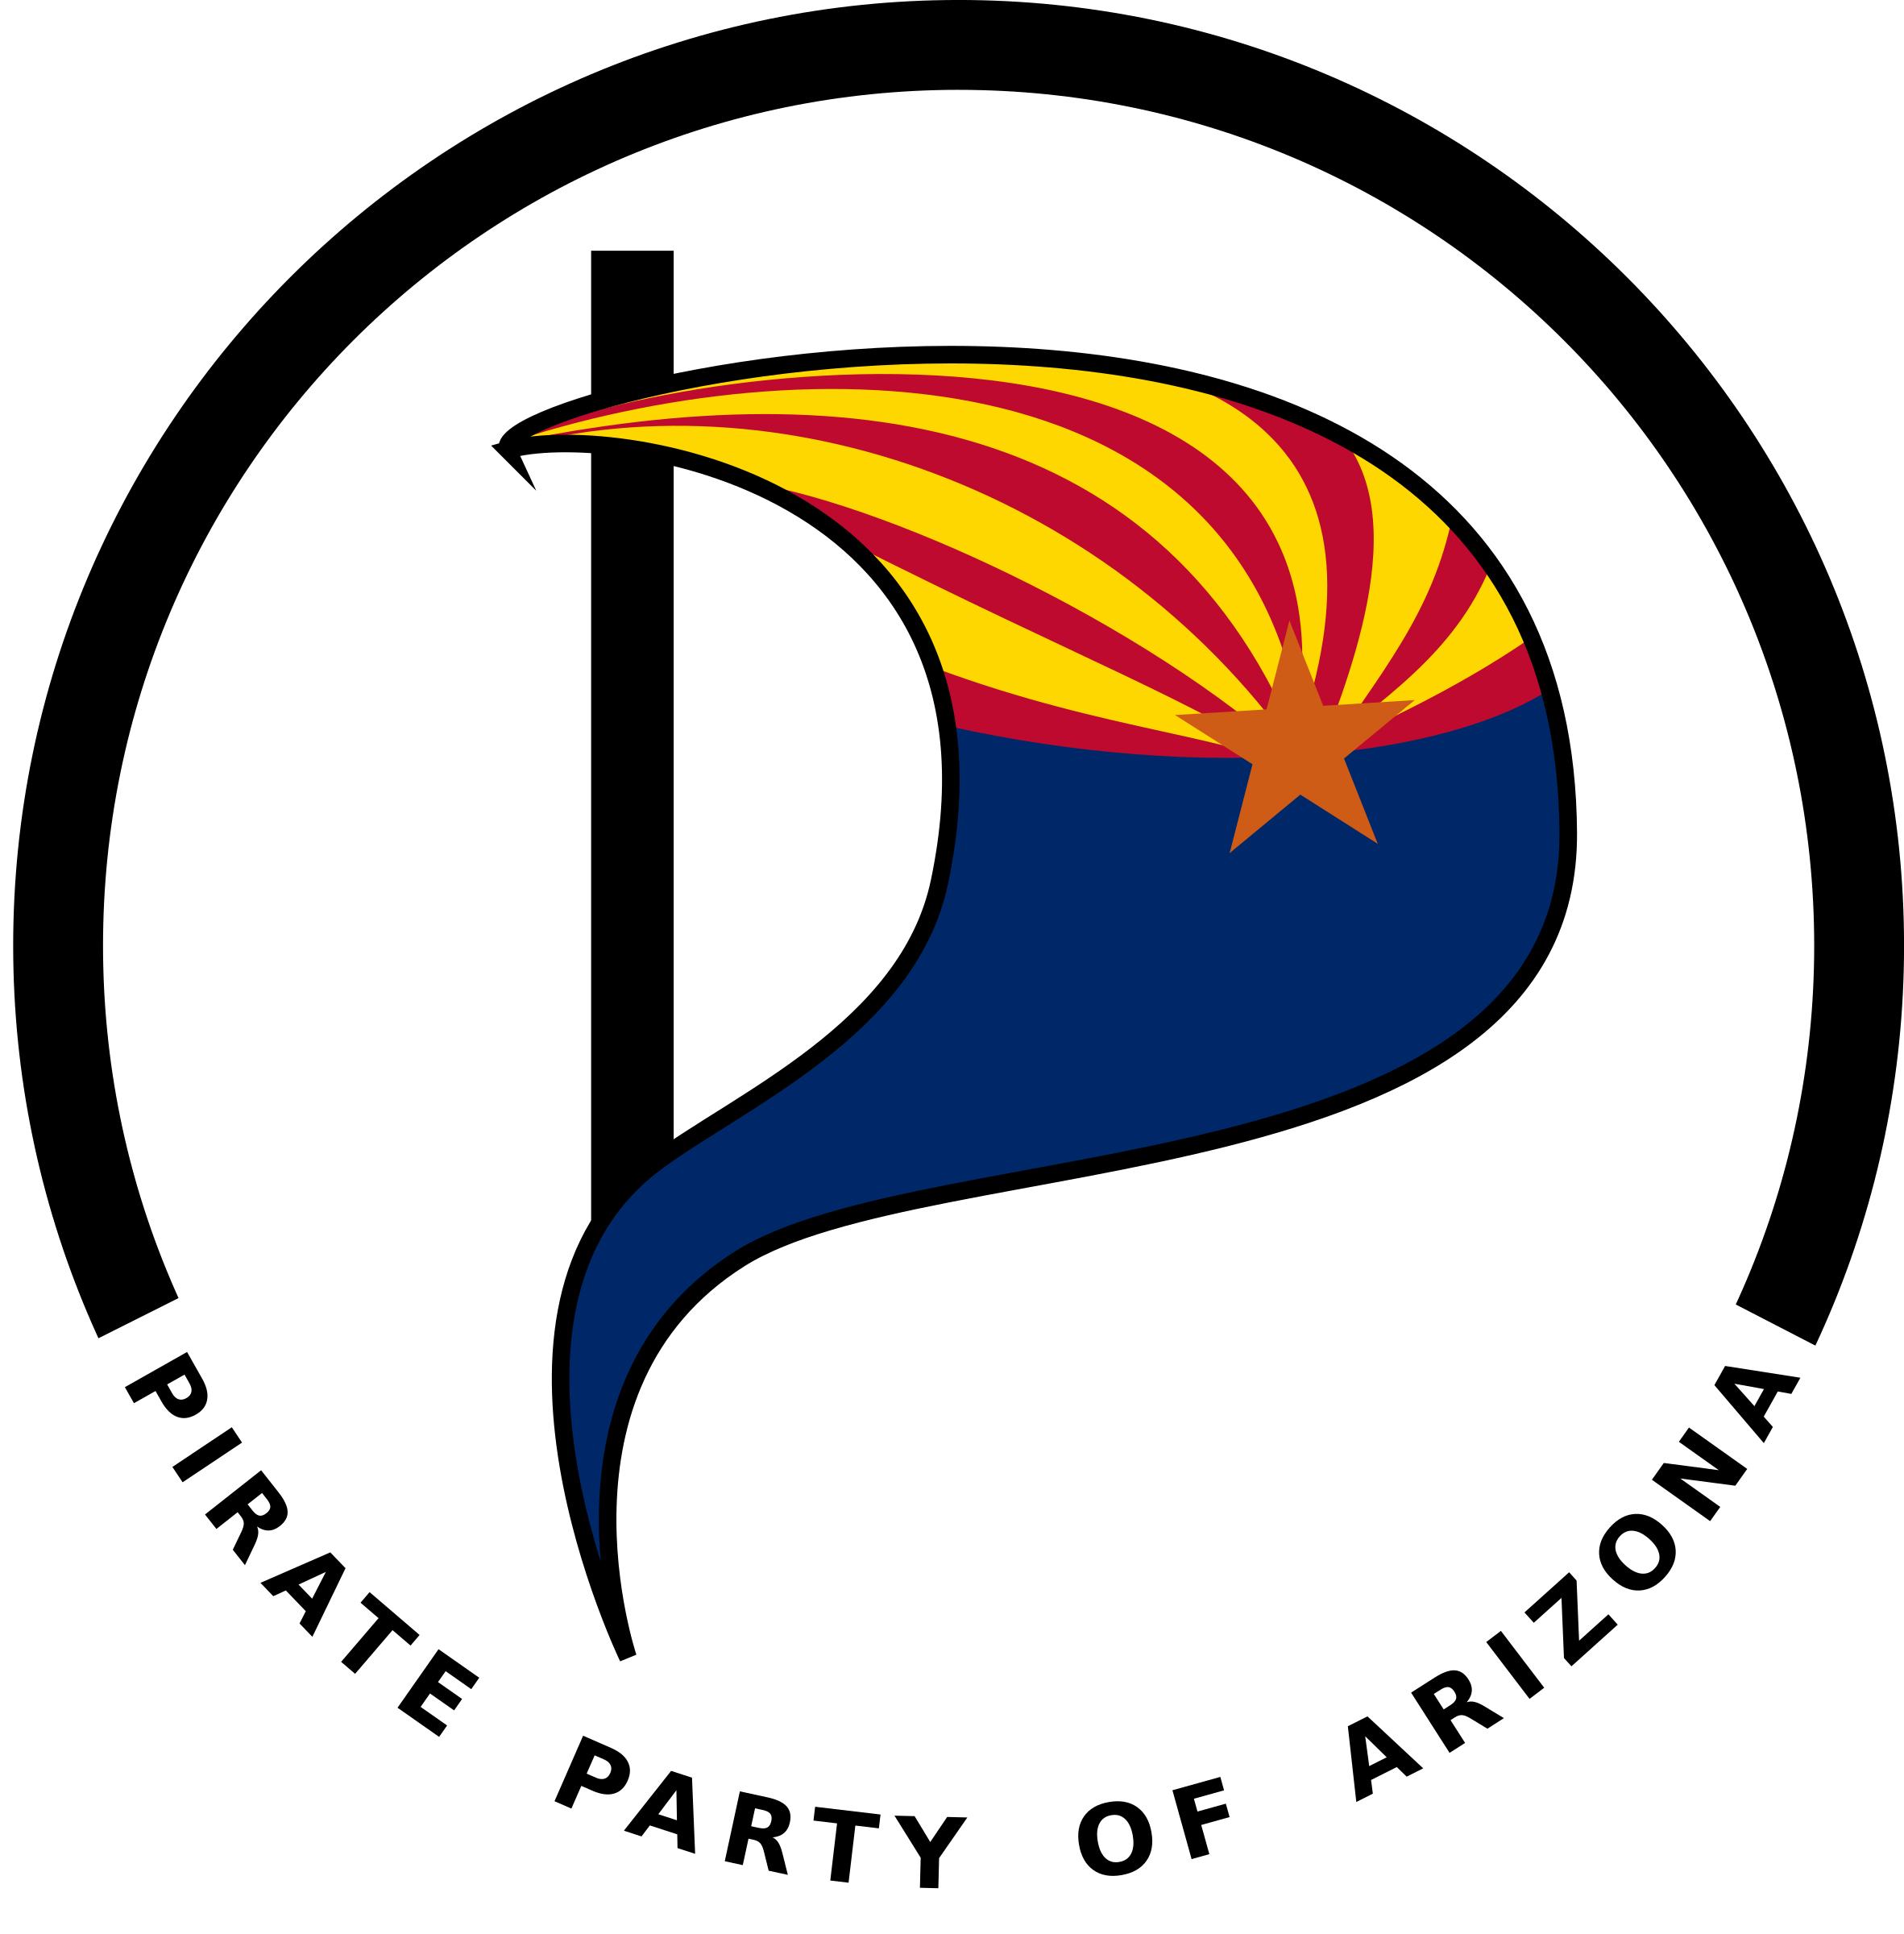 Pirate Party of Arizona logo PNG icons